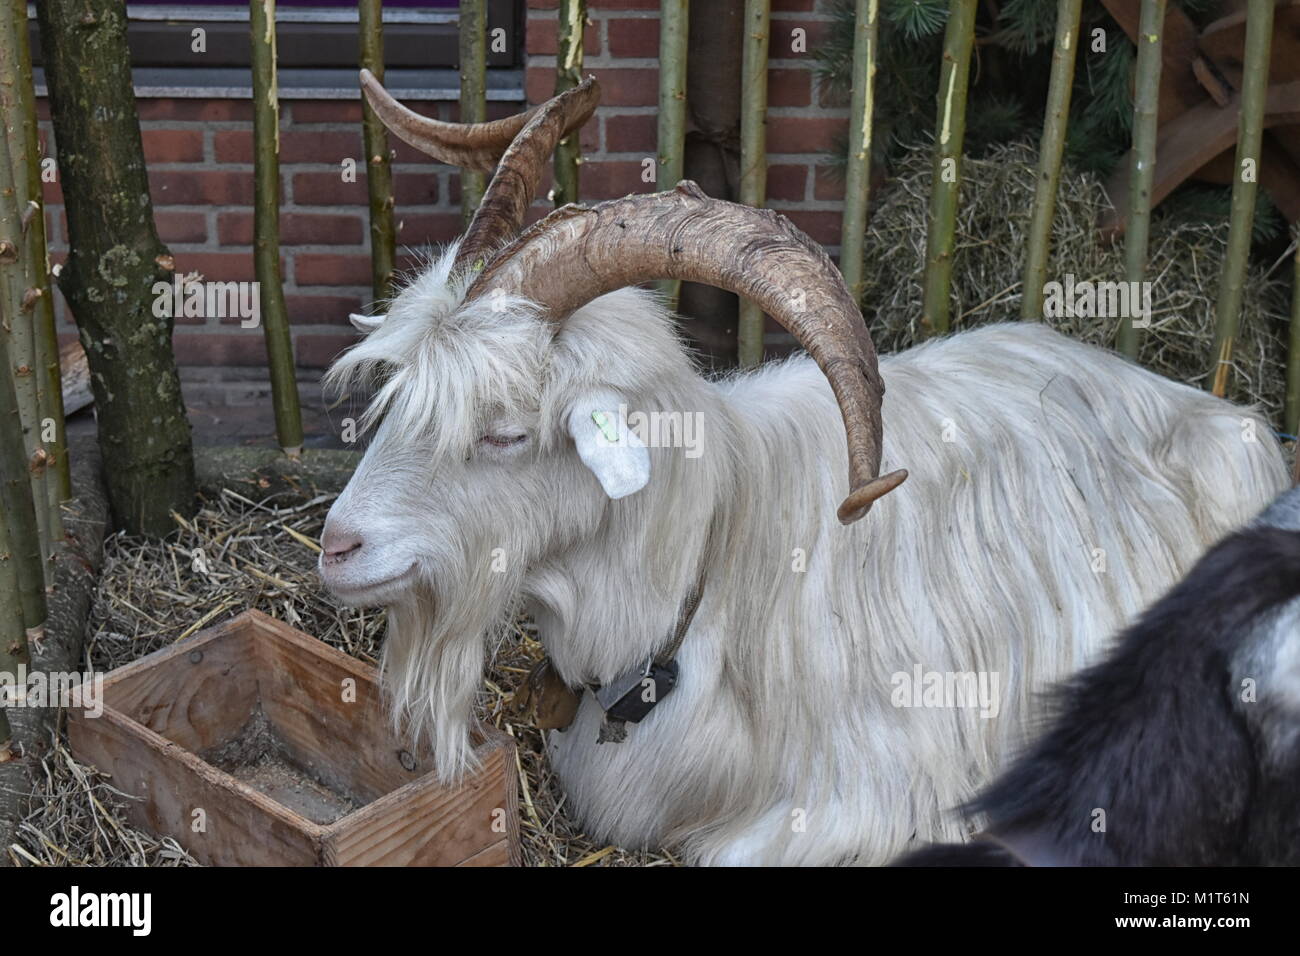 Male long haired goat with large curling horns Stock Photo